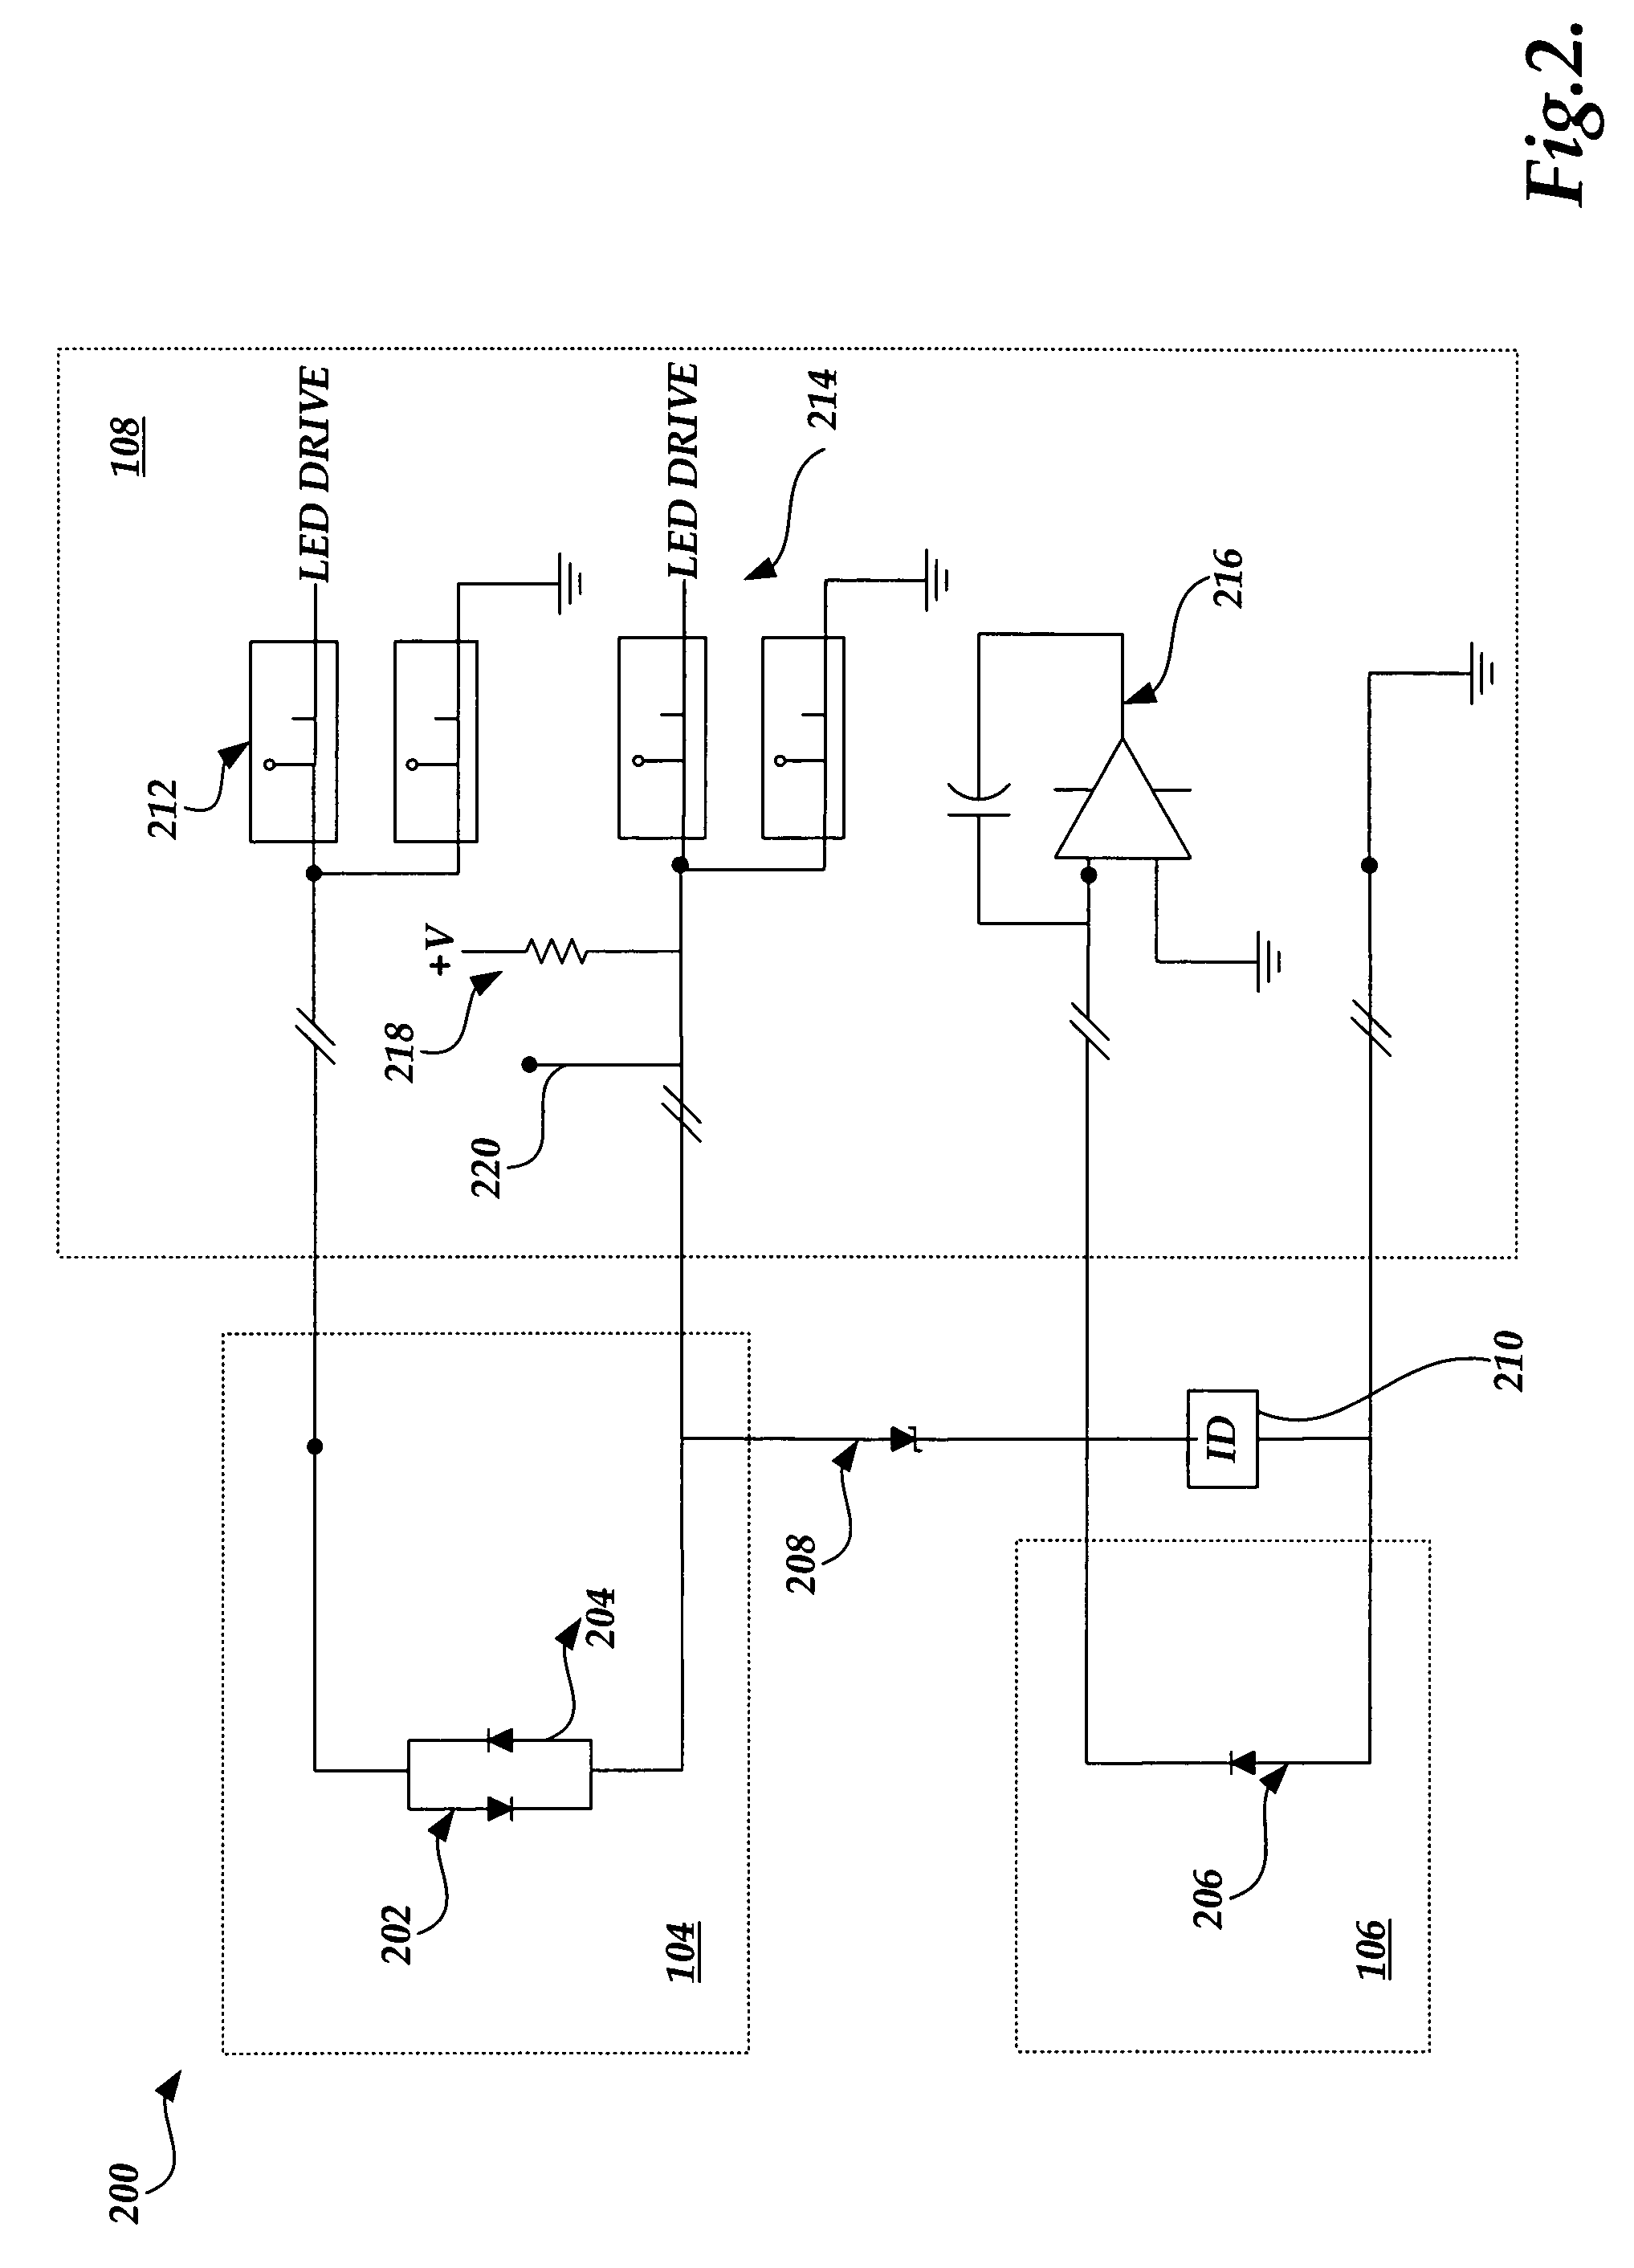 System and method for processing information in a pulse oximeter